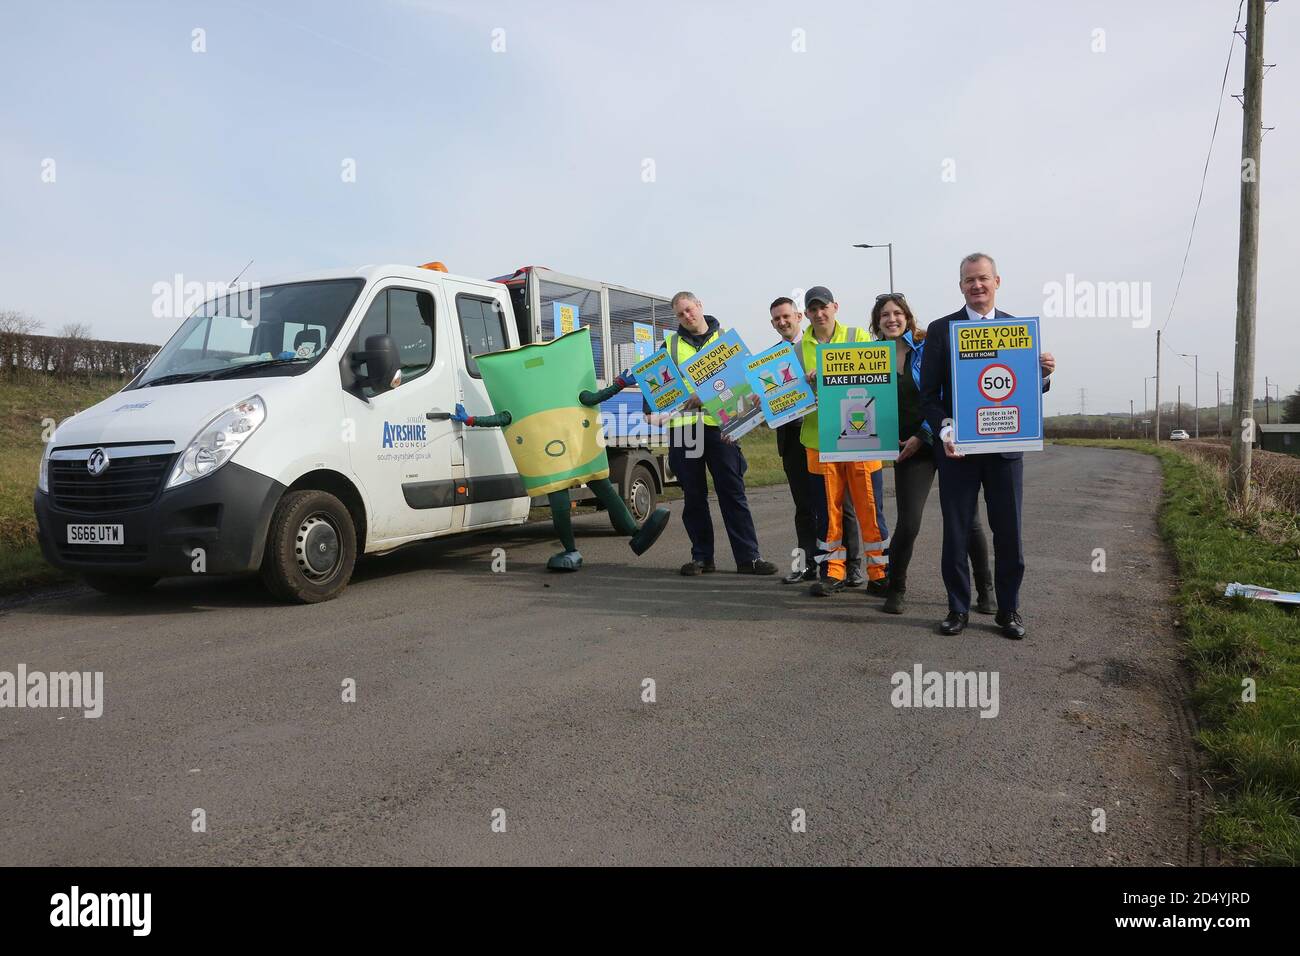 Keep Scotland Beautiful Promotion Ayr, A PR campaign promoting a litter free enviroment, with South Ayrshire Council. Images show council officials with mascot and posters Stock Photo